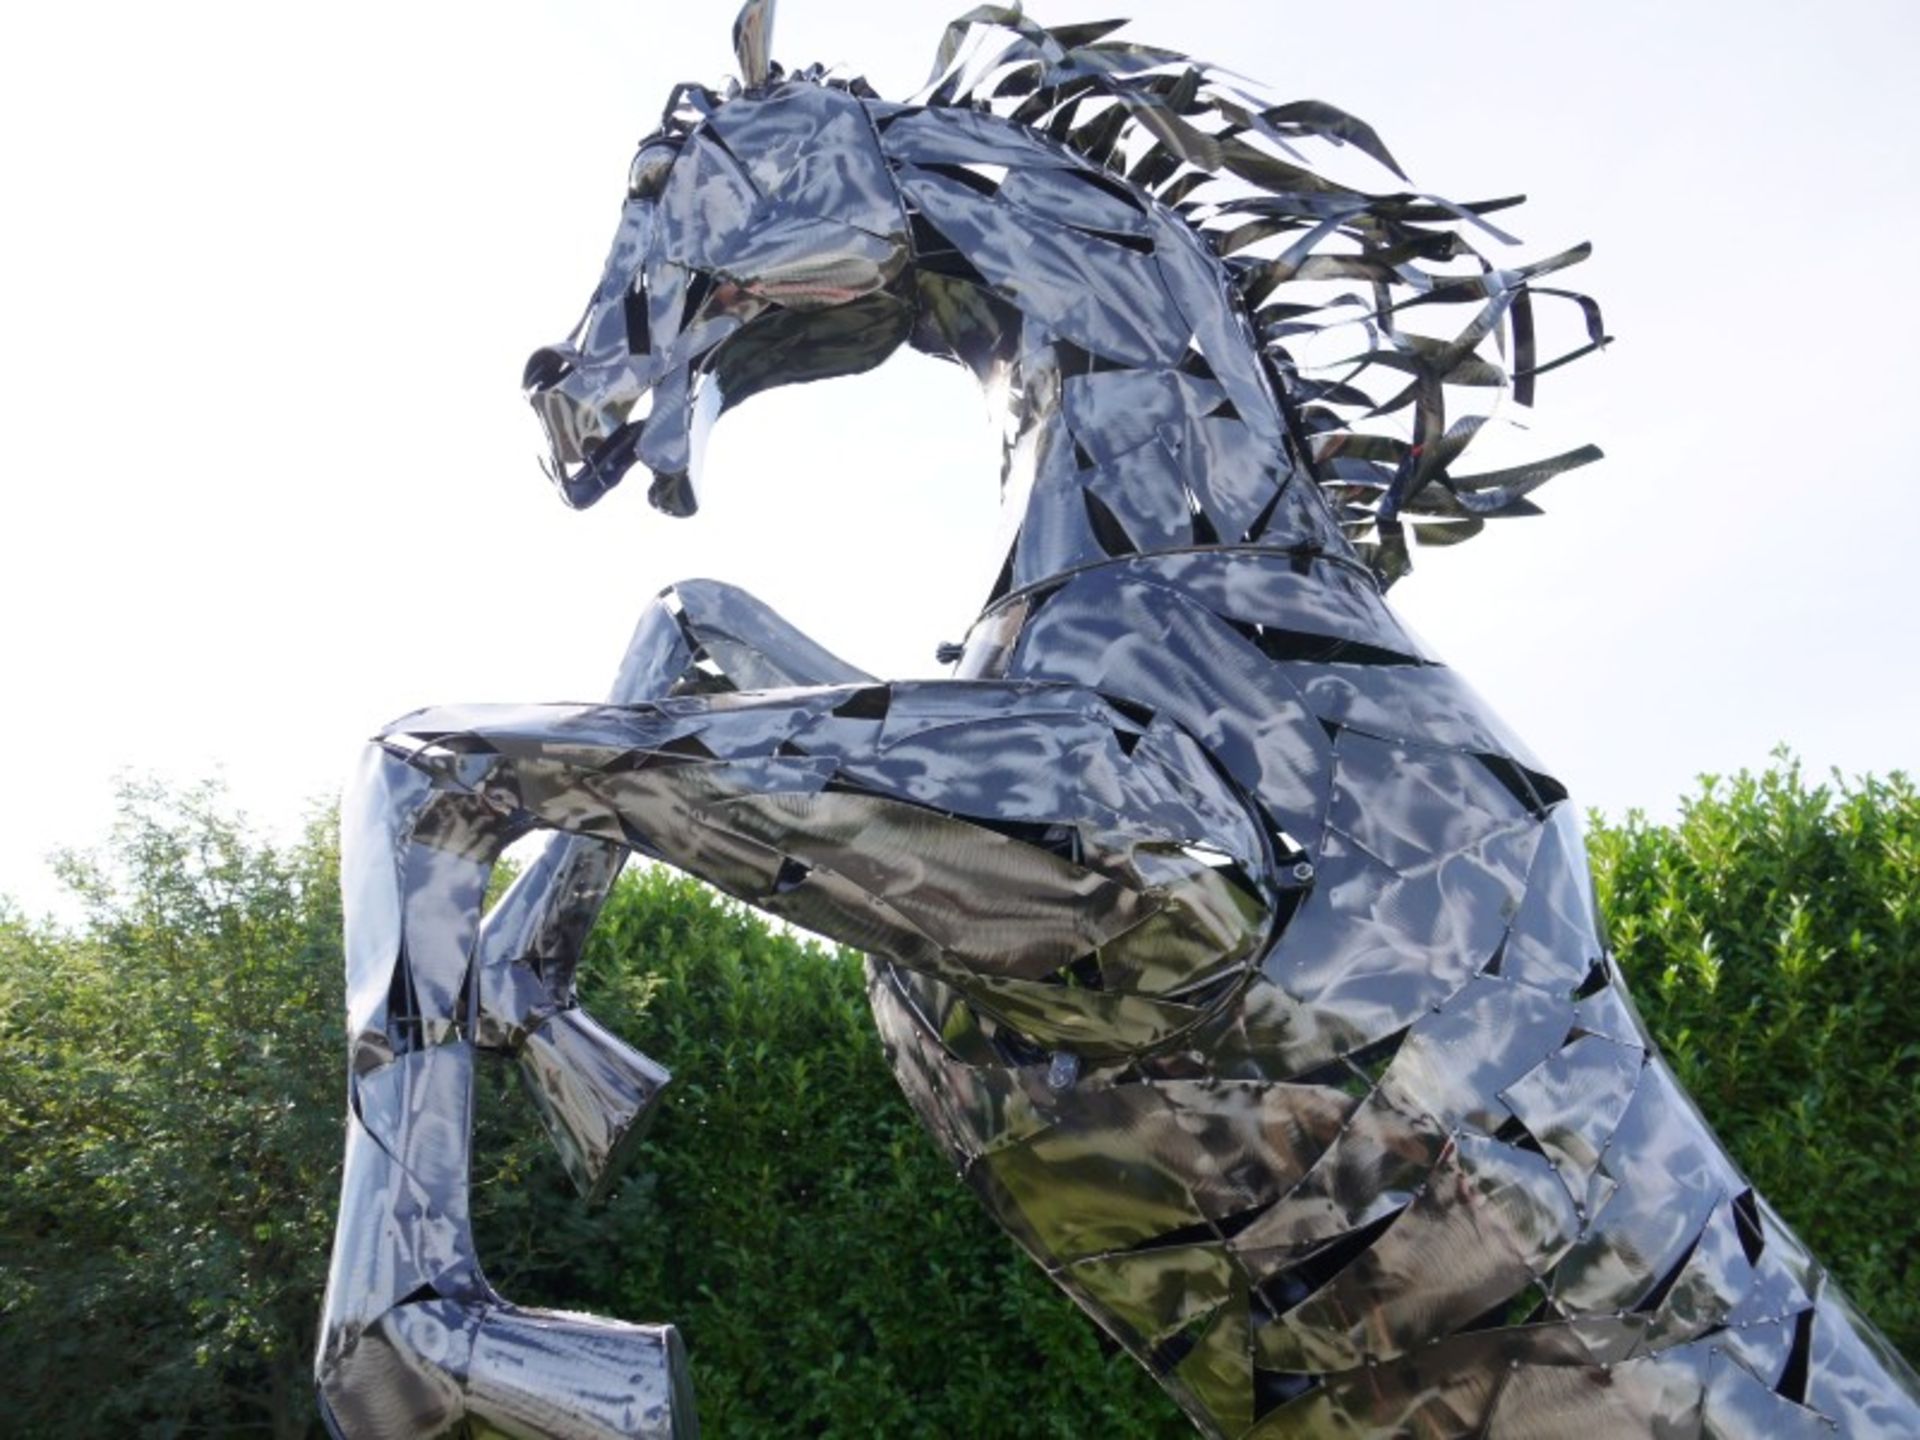 HUGE REARING HORSE STATUE 11FT HIGH - Image 4 of 5